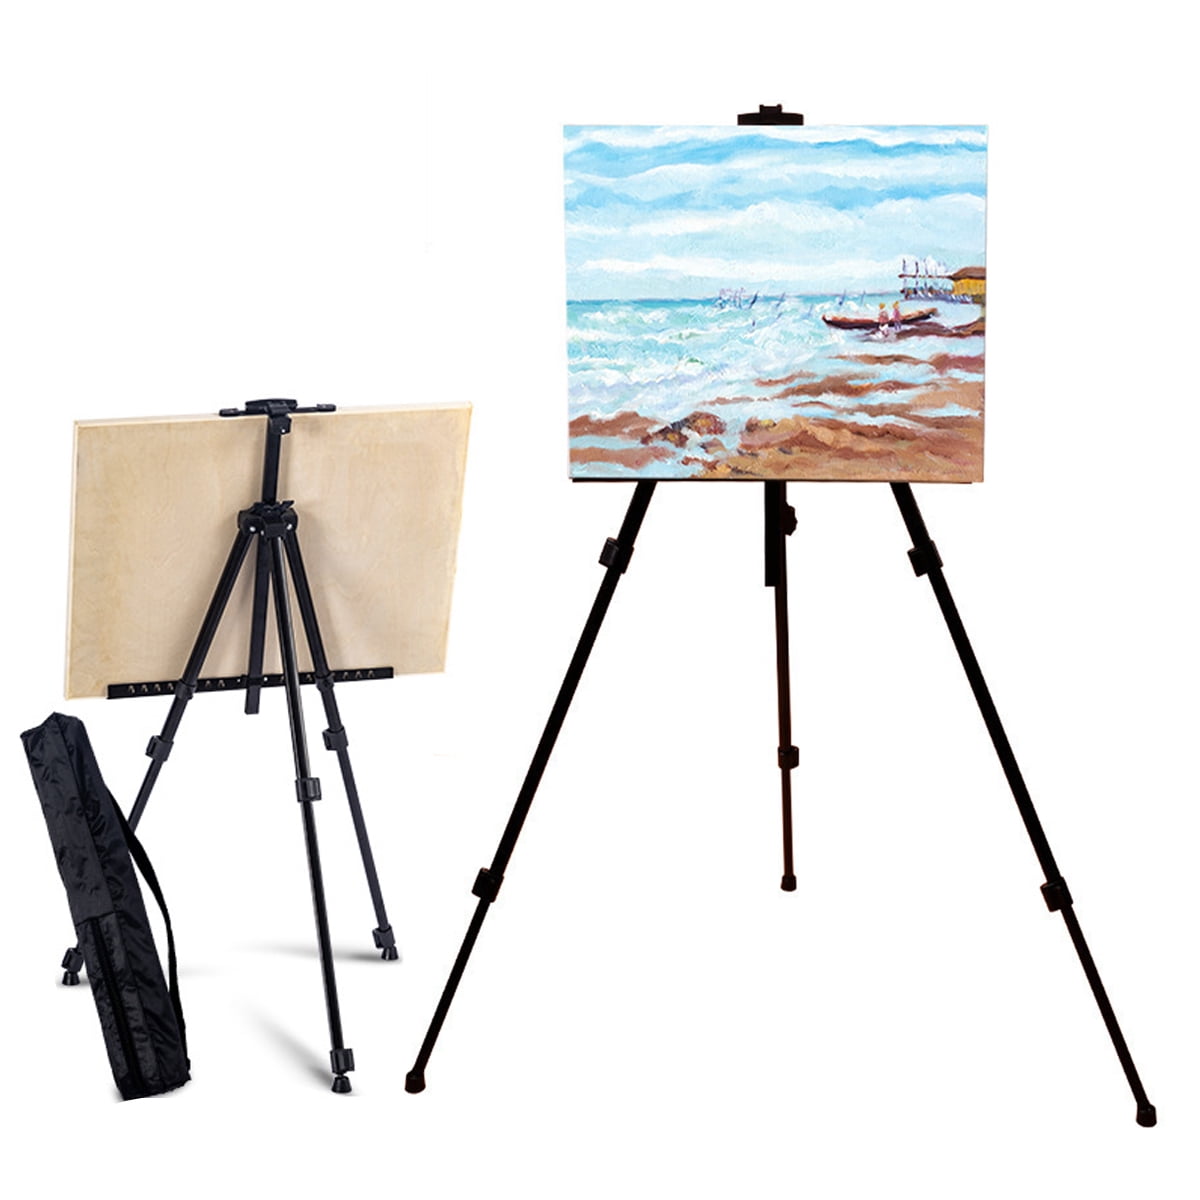 WOODEN EASEL STAND > Wooden Floor Easel Stand, 30x71 Tripod Art Display  Stand, Adjustable Canvas Holder up to 42, for Artist Painting & Displaying  Artwork Buy from e-shop